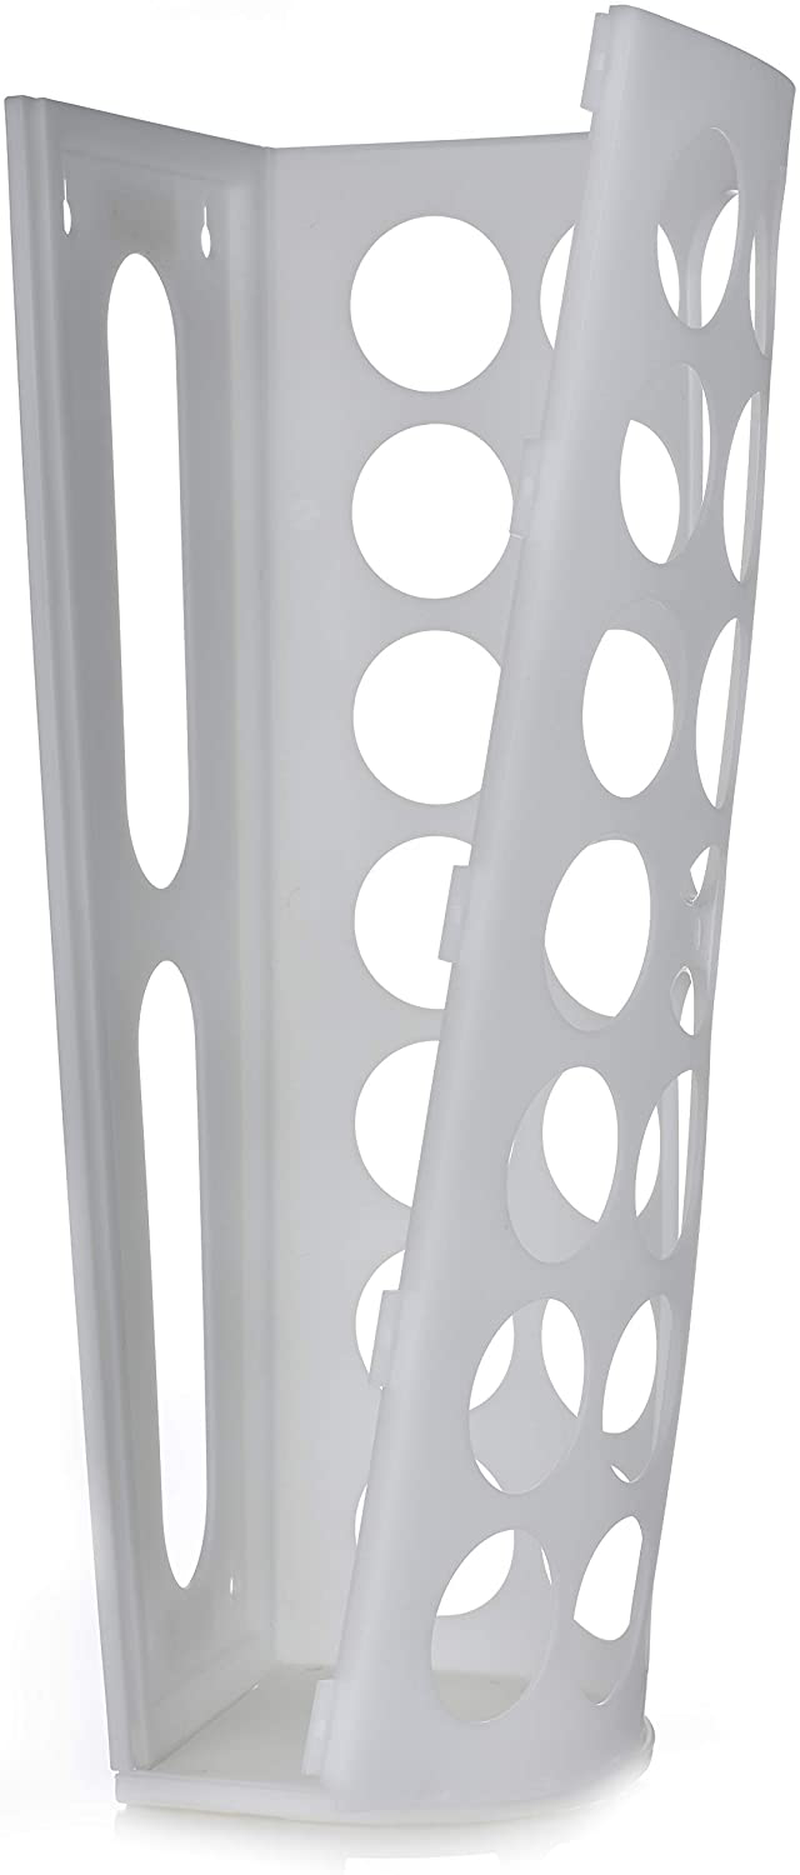 Grocery Bag Storage Holder - This Large Capacity Bag Dispenser Will Neatly Store Plastic Shopping Bags and Keep Them Handy for Reuse. Access Holes Make Adding or Retrieving Bags Simple and Convenient. Home & Garden > Kitchen & Dining > Food Storage Handy Laundry   